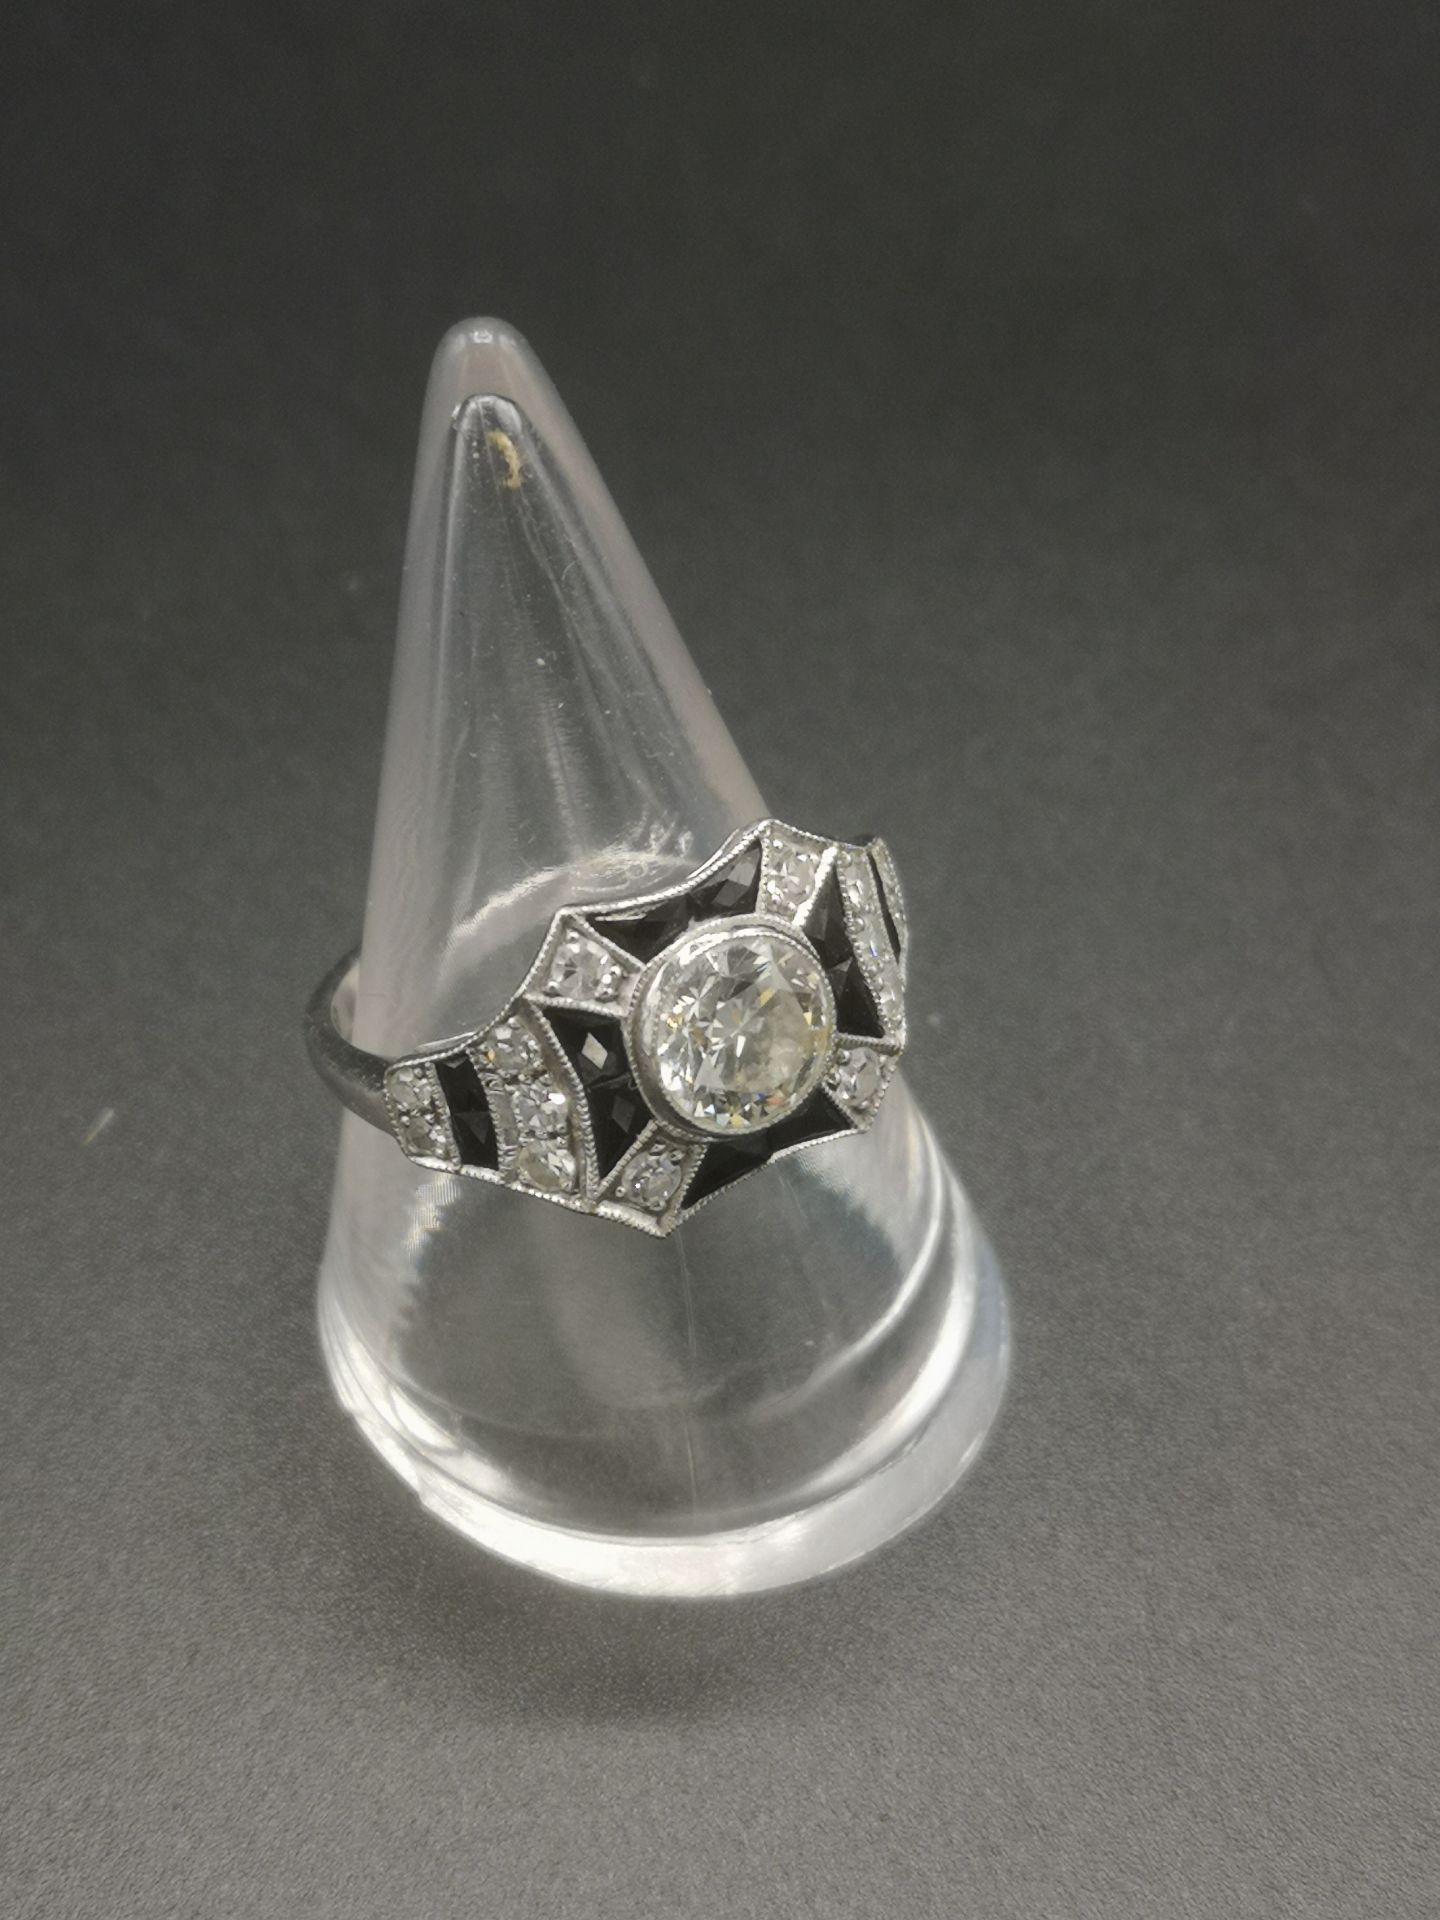 18ct white gold, diamond and black onyx ring - Image 6 of 7